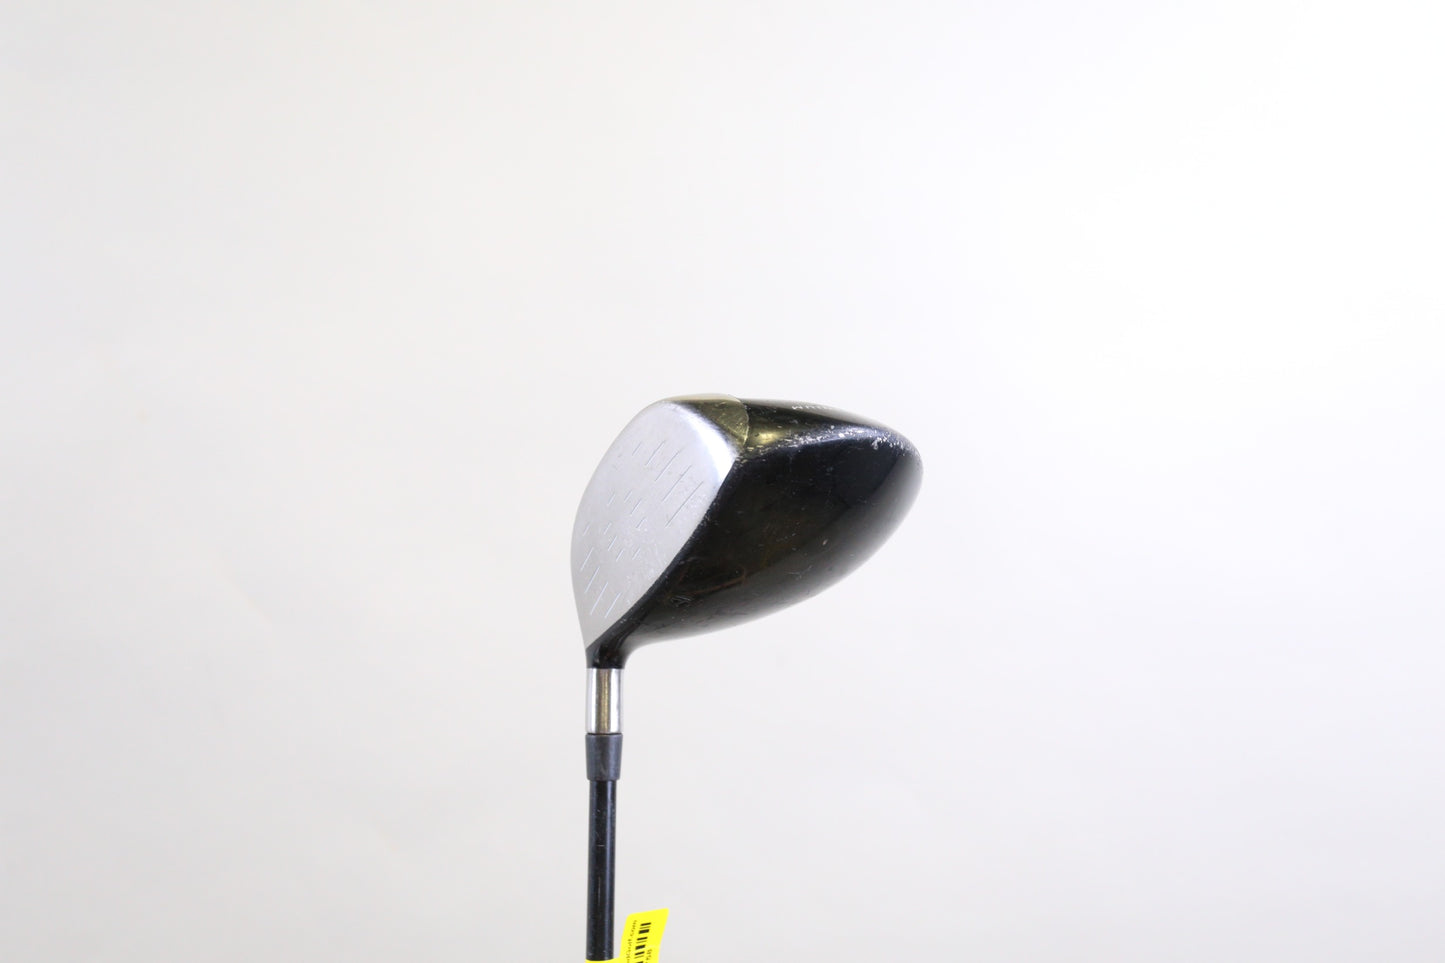 Used TaylorMade R540 Driver - Right-Handed - 9.5 Degrees - Stiff Flex